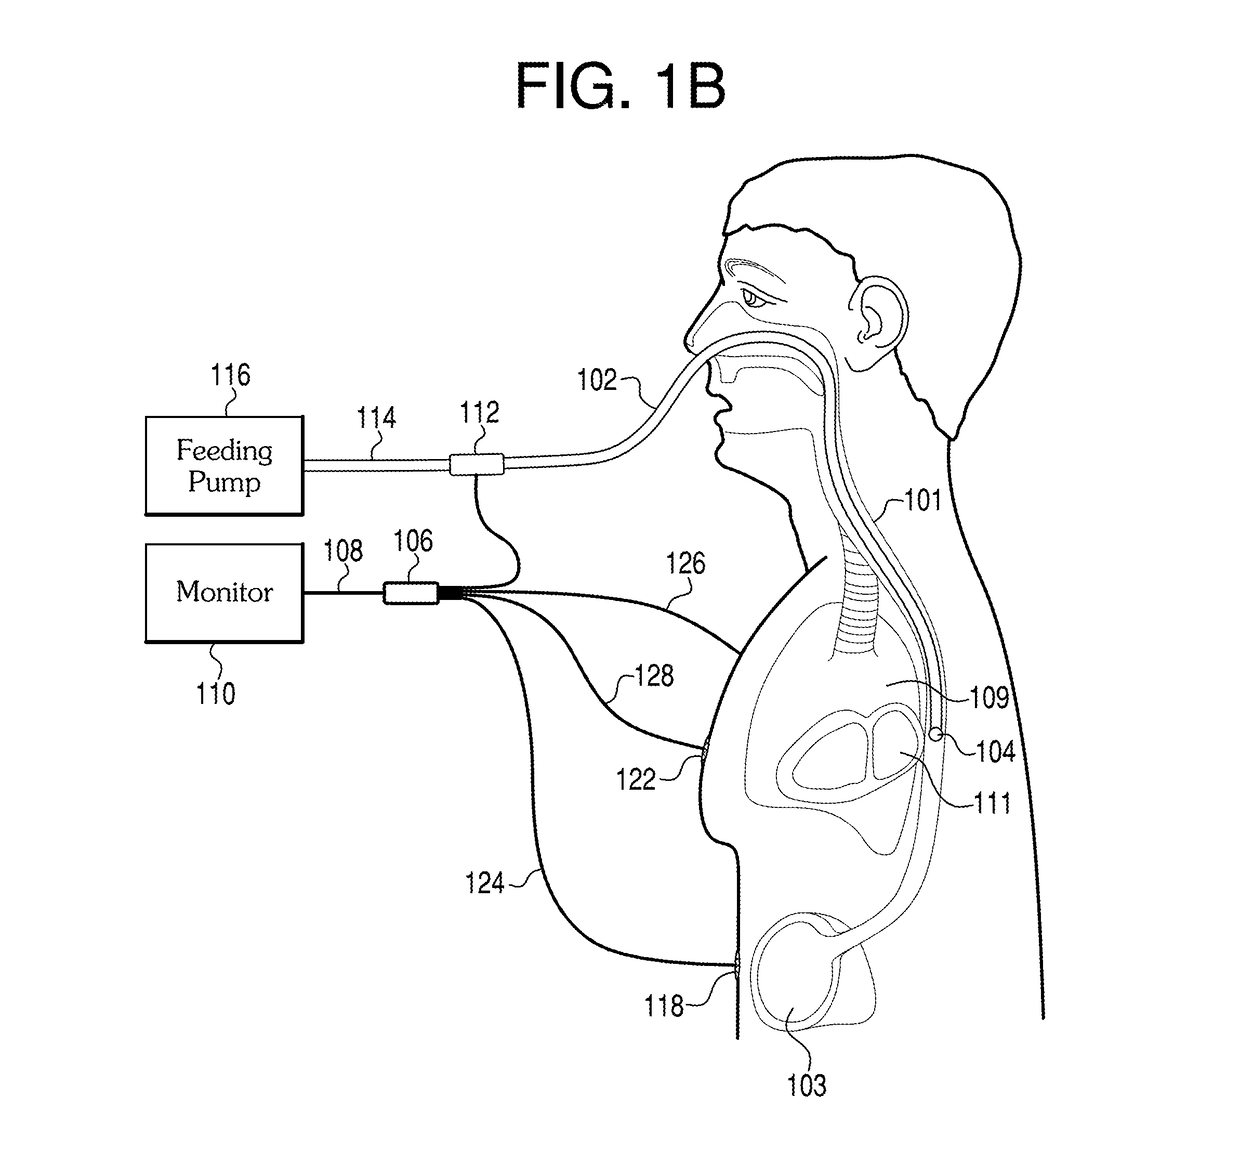 Methods and apparatus for guiding medical care based on sensor data from the gastrointestinal tract